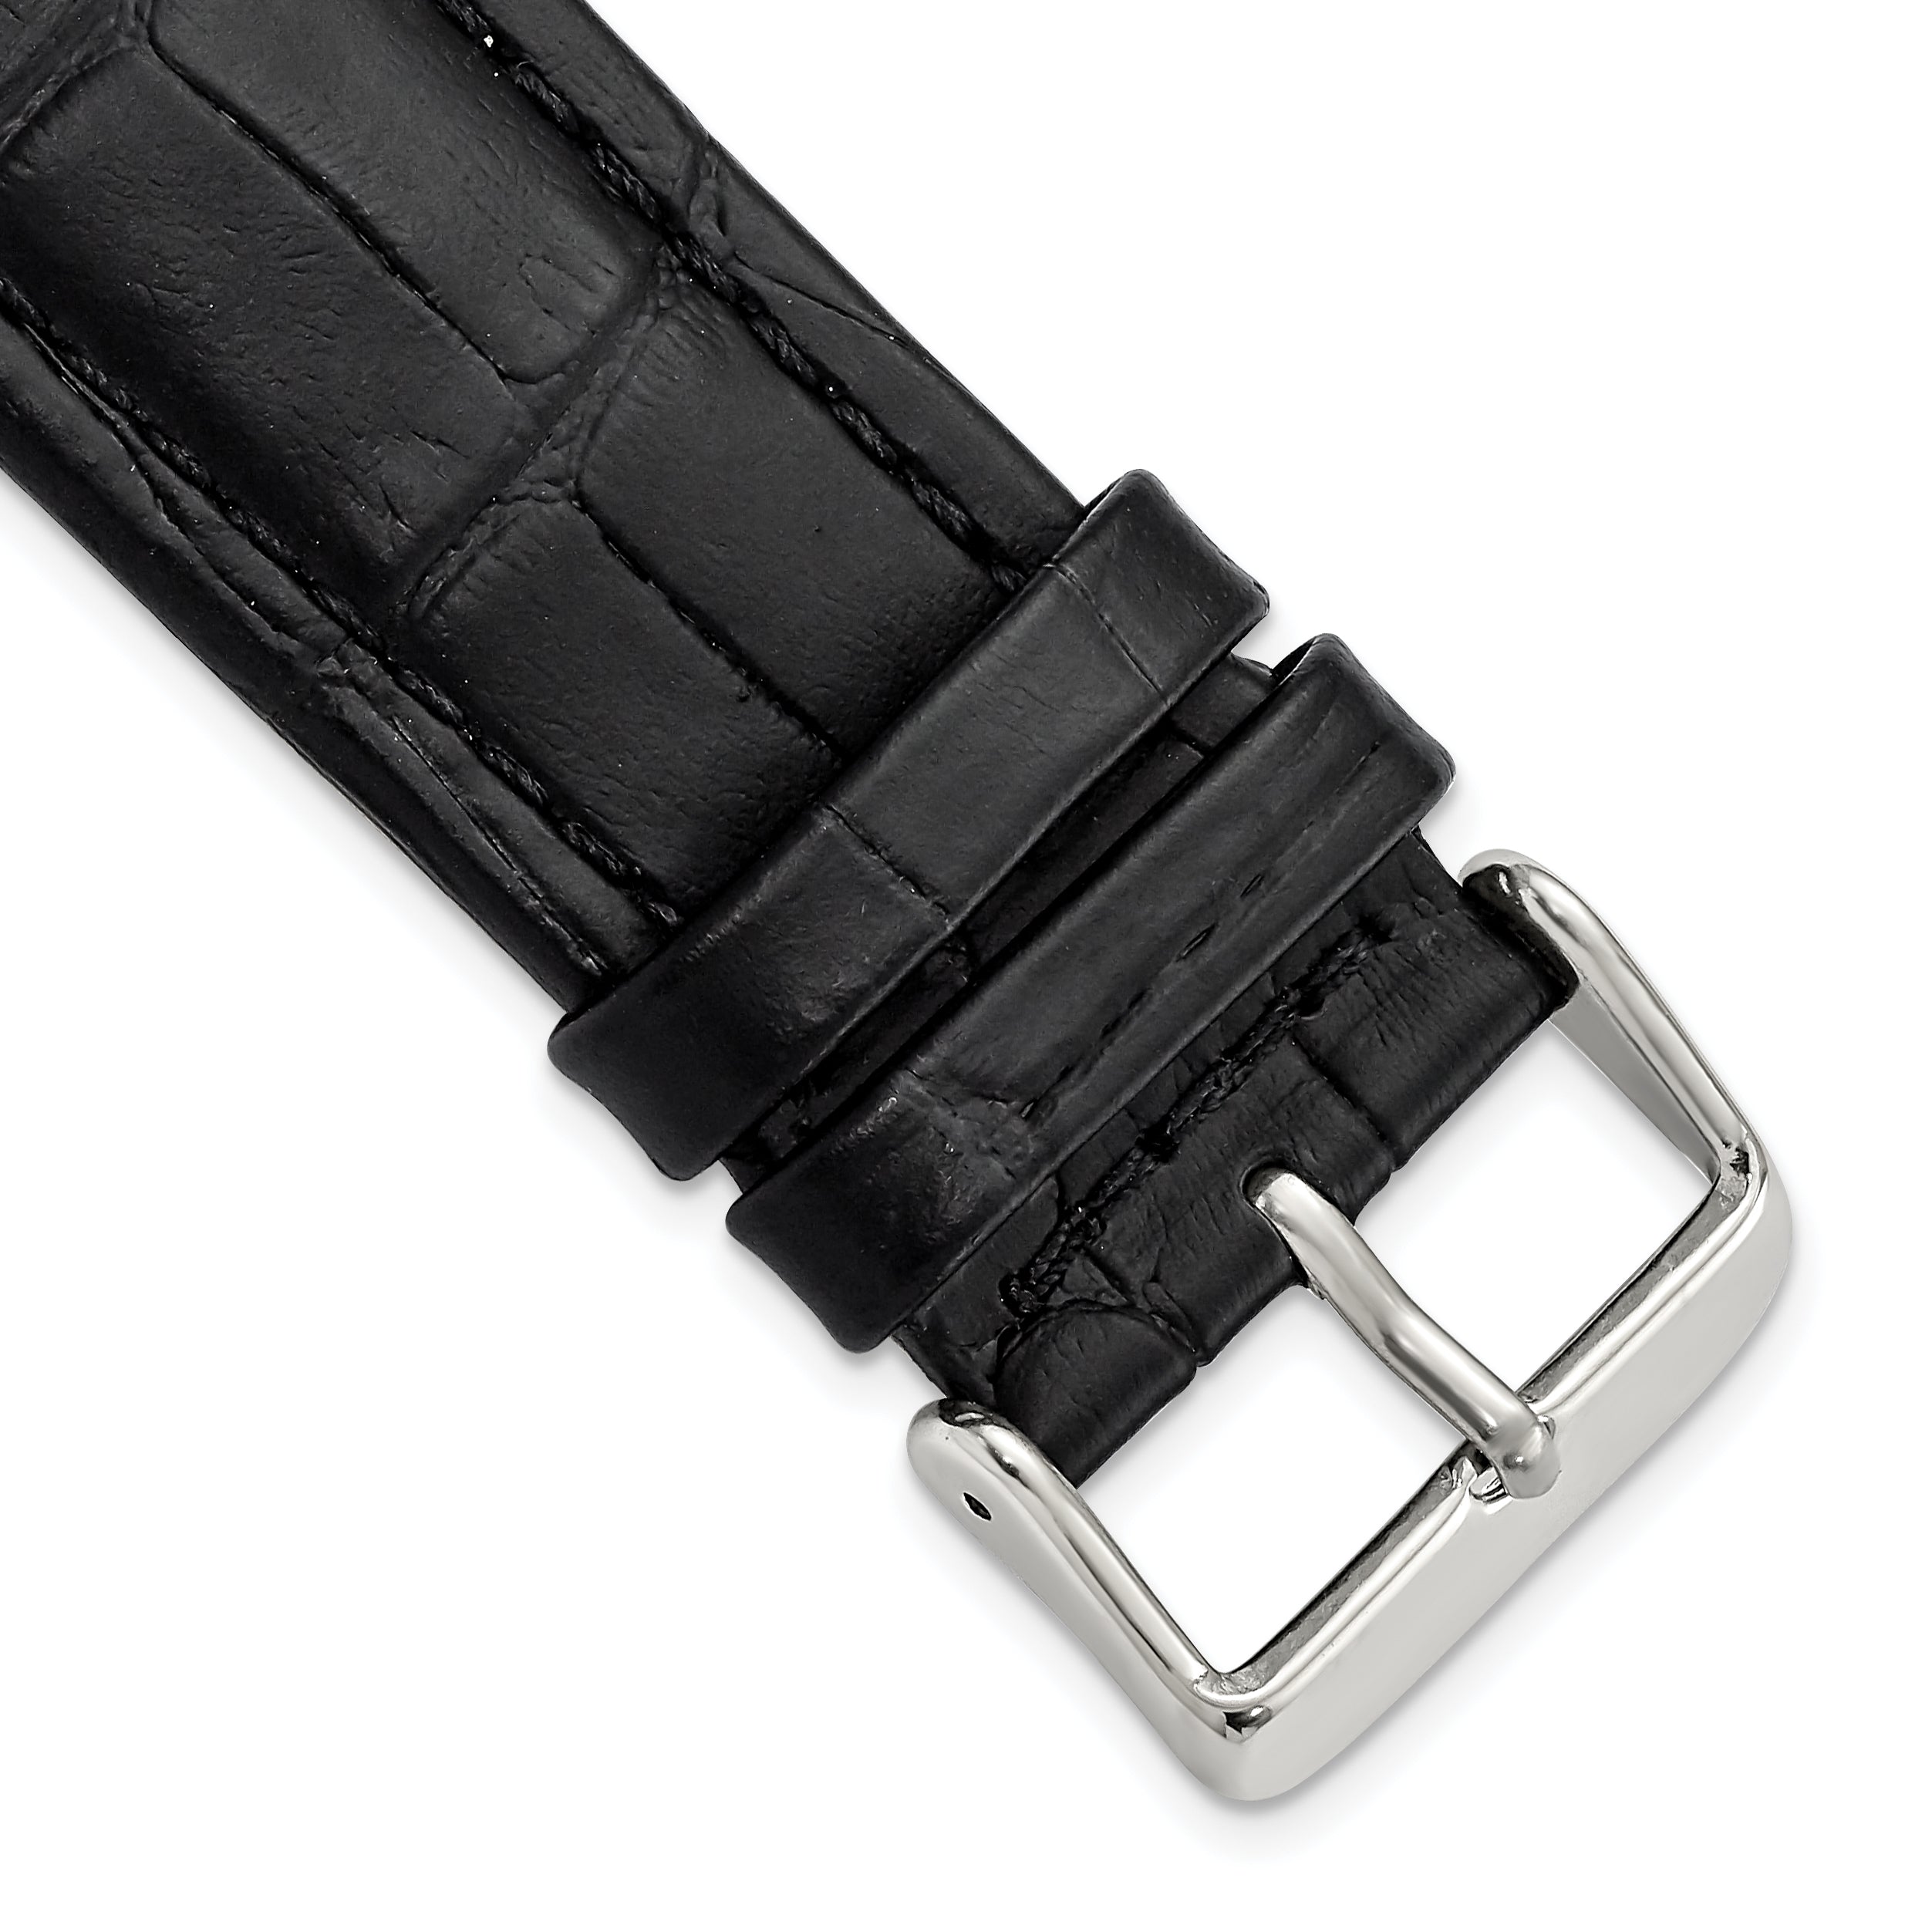 DeBeer 24mm Black Matte Alligator Grain Leather with Silver-tone Buckle 7.5 inch Watch Band